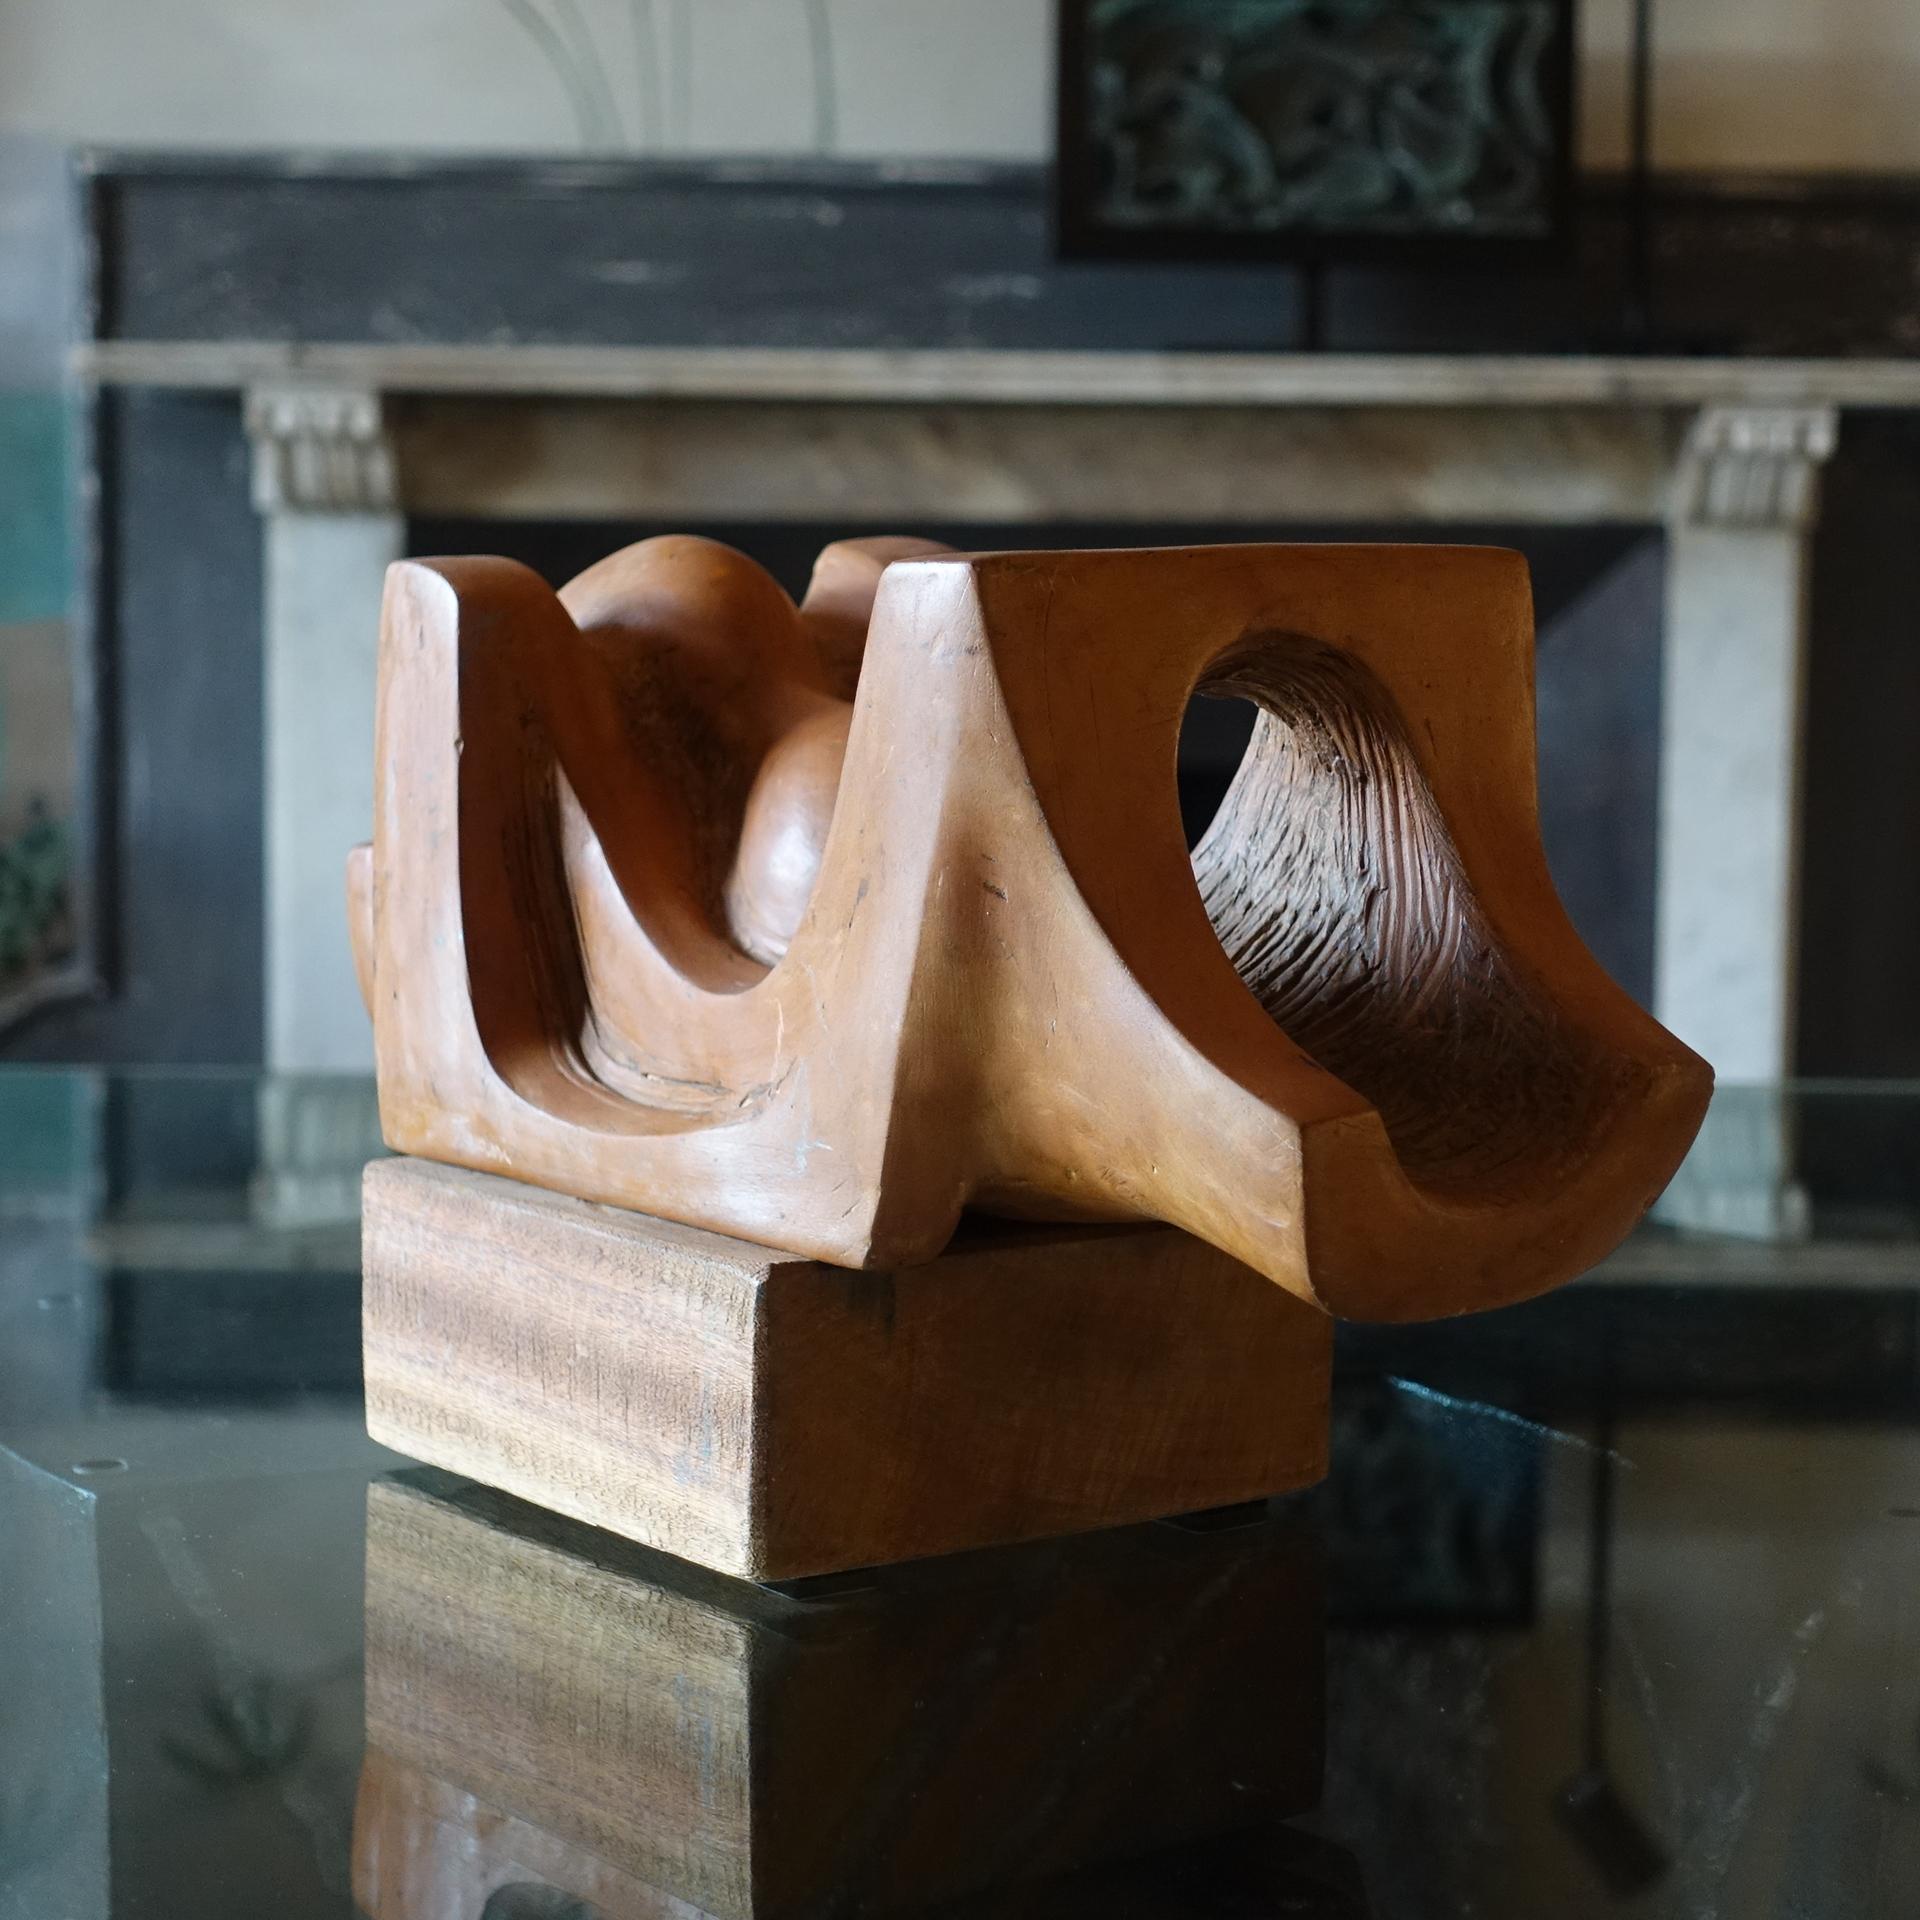 Abstract terracotta sculpture on wood base, perfect condition and vintage patina, signed T.Assi, Italy, circa 1960s.